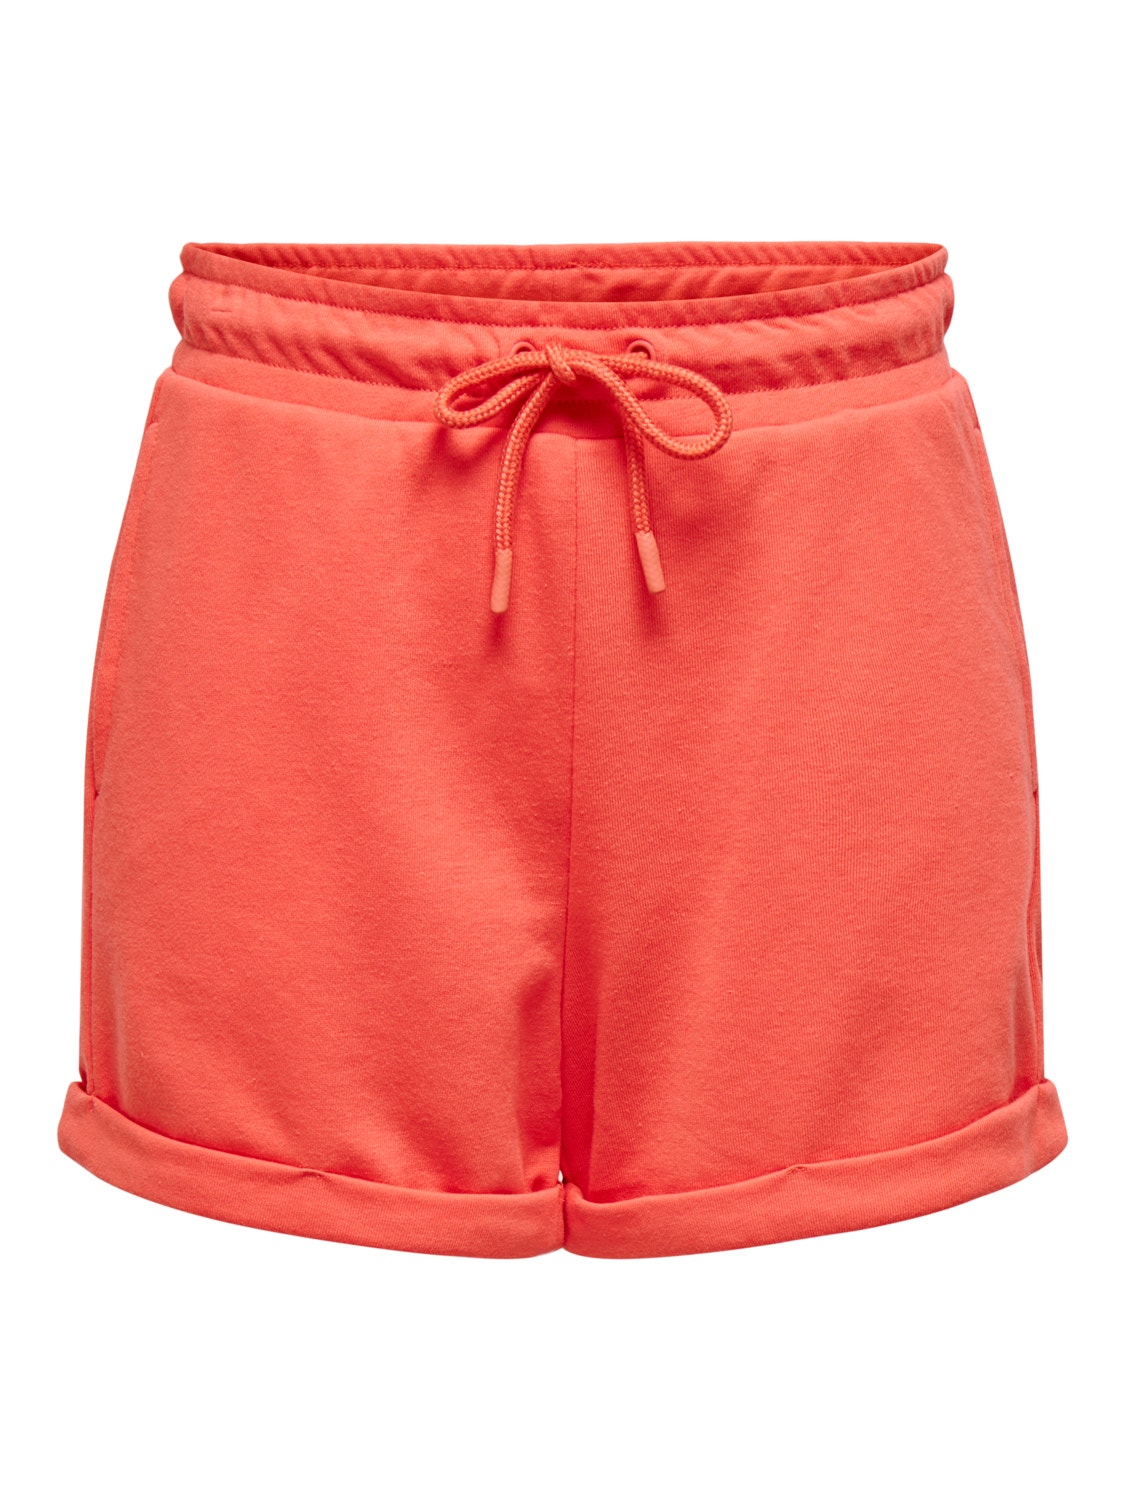 ONLY High waist Shorts -Hot Coral - 15253510